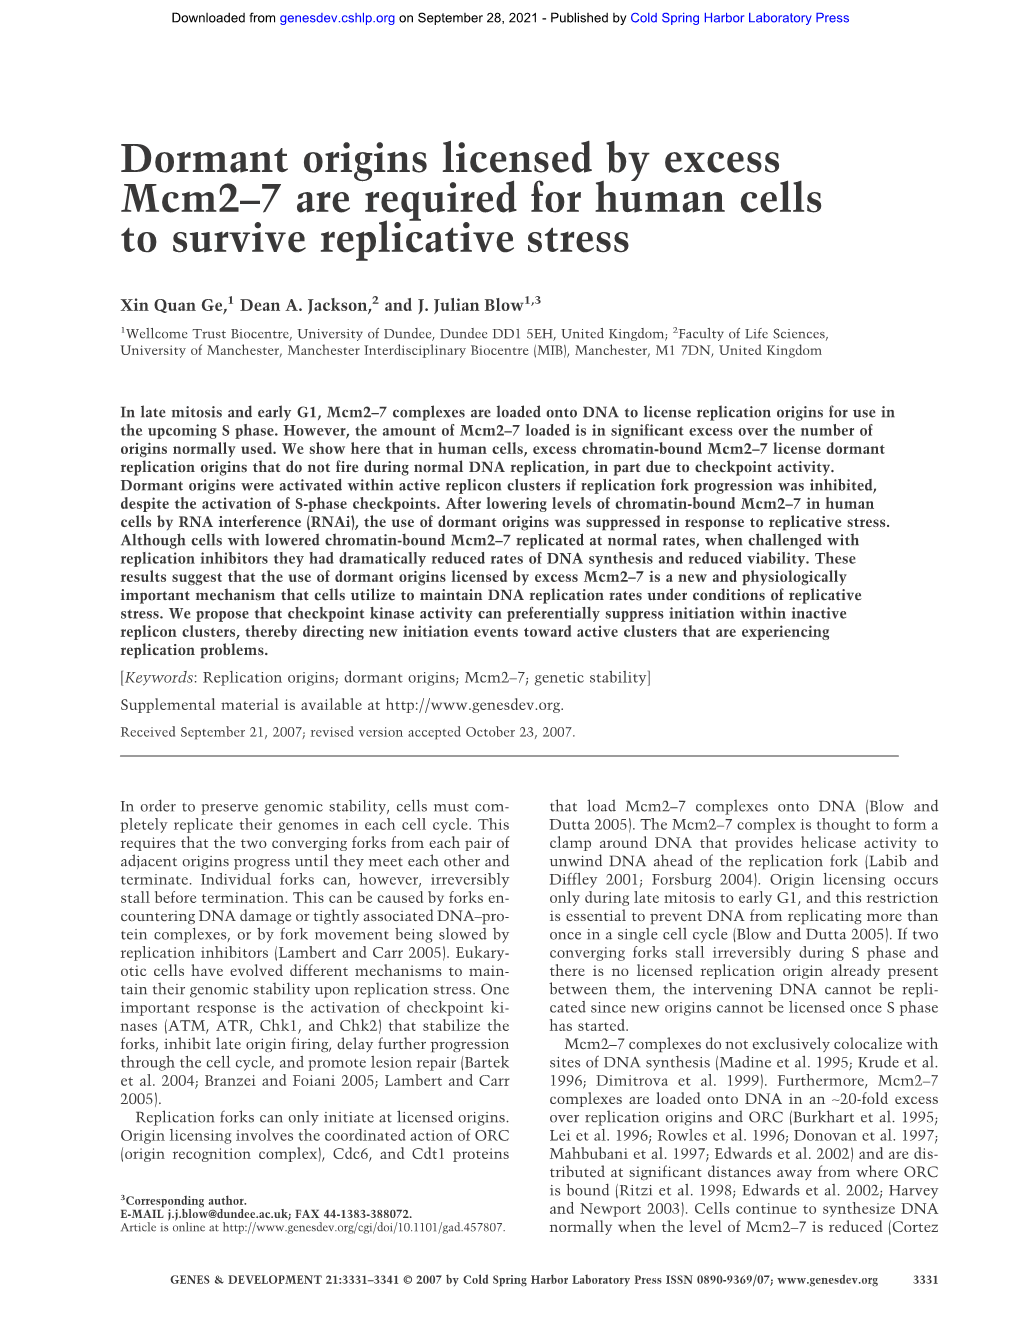 Dormant Origins Licensed by Excess Mcm2–7 Are Required for Human Cells to Survive Replicative Stress